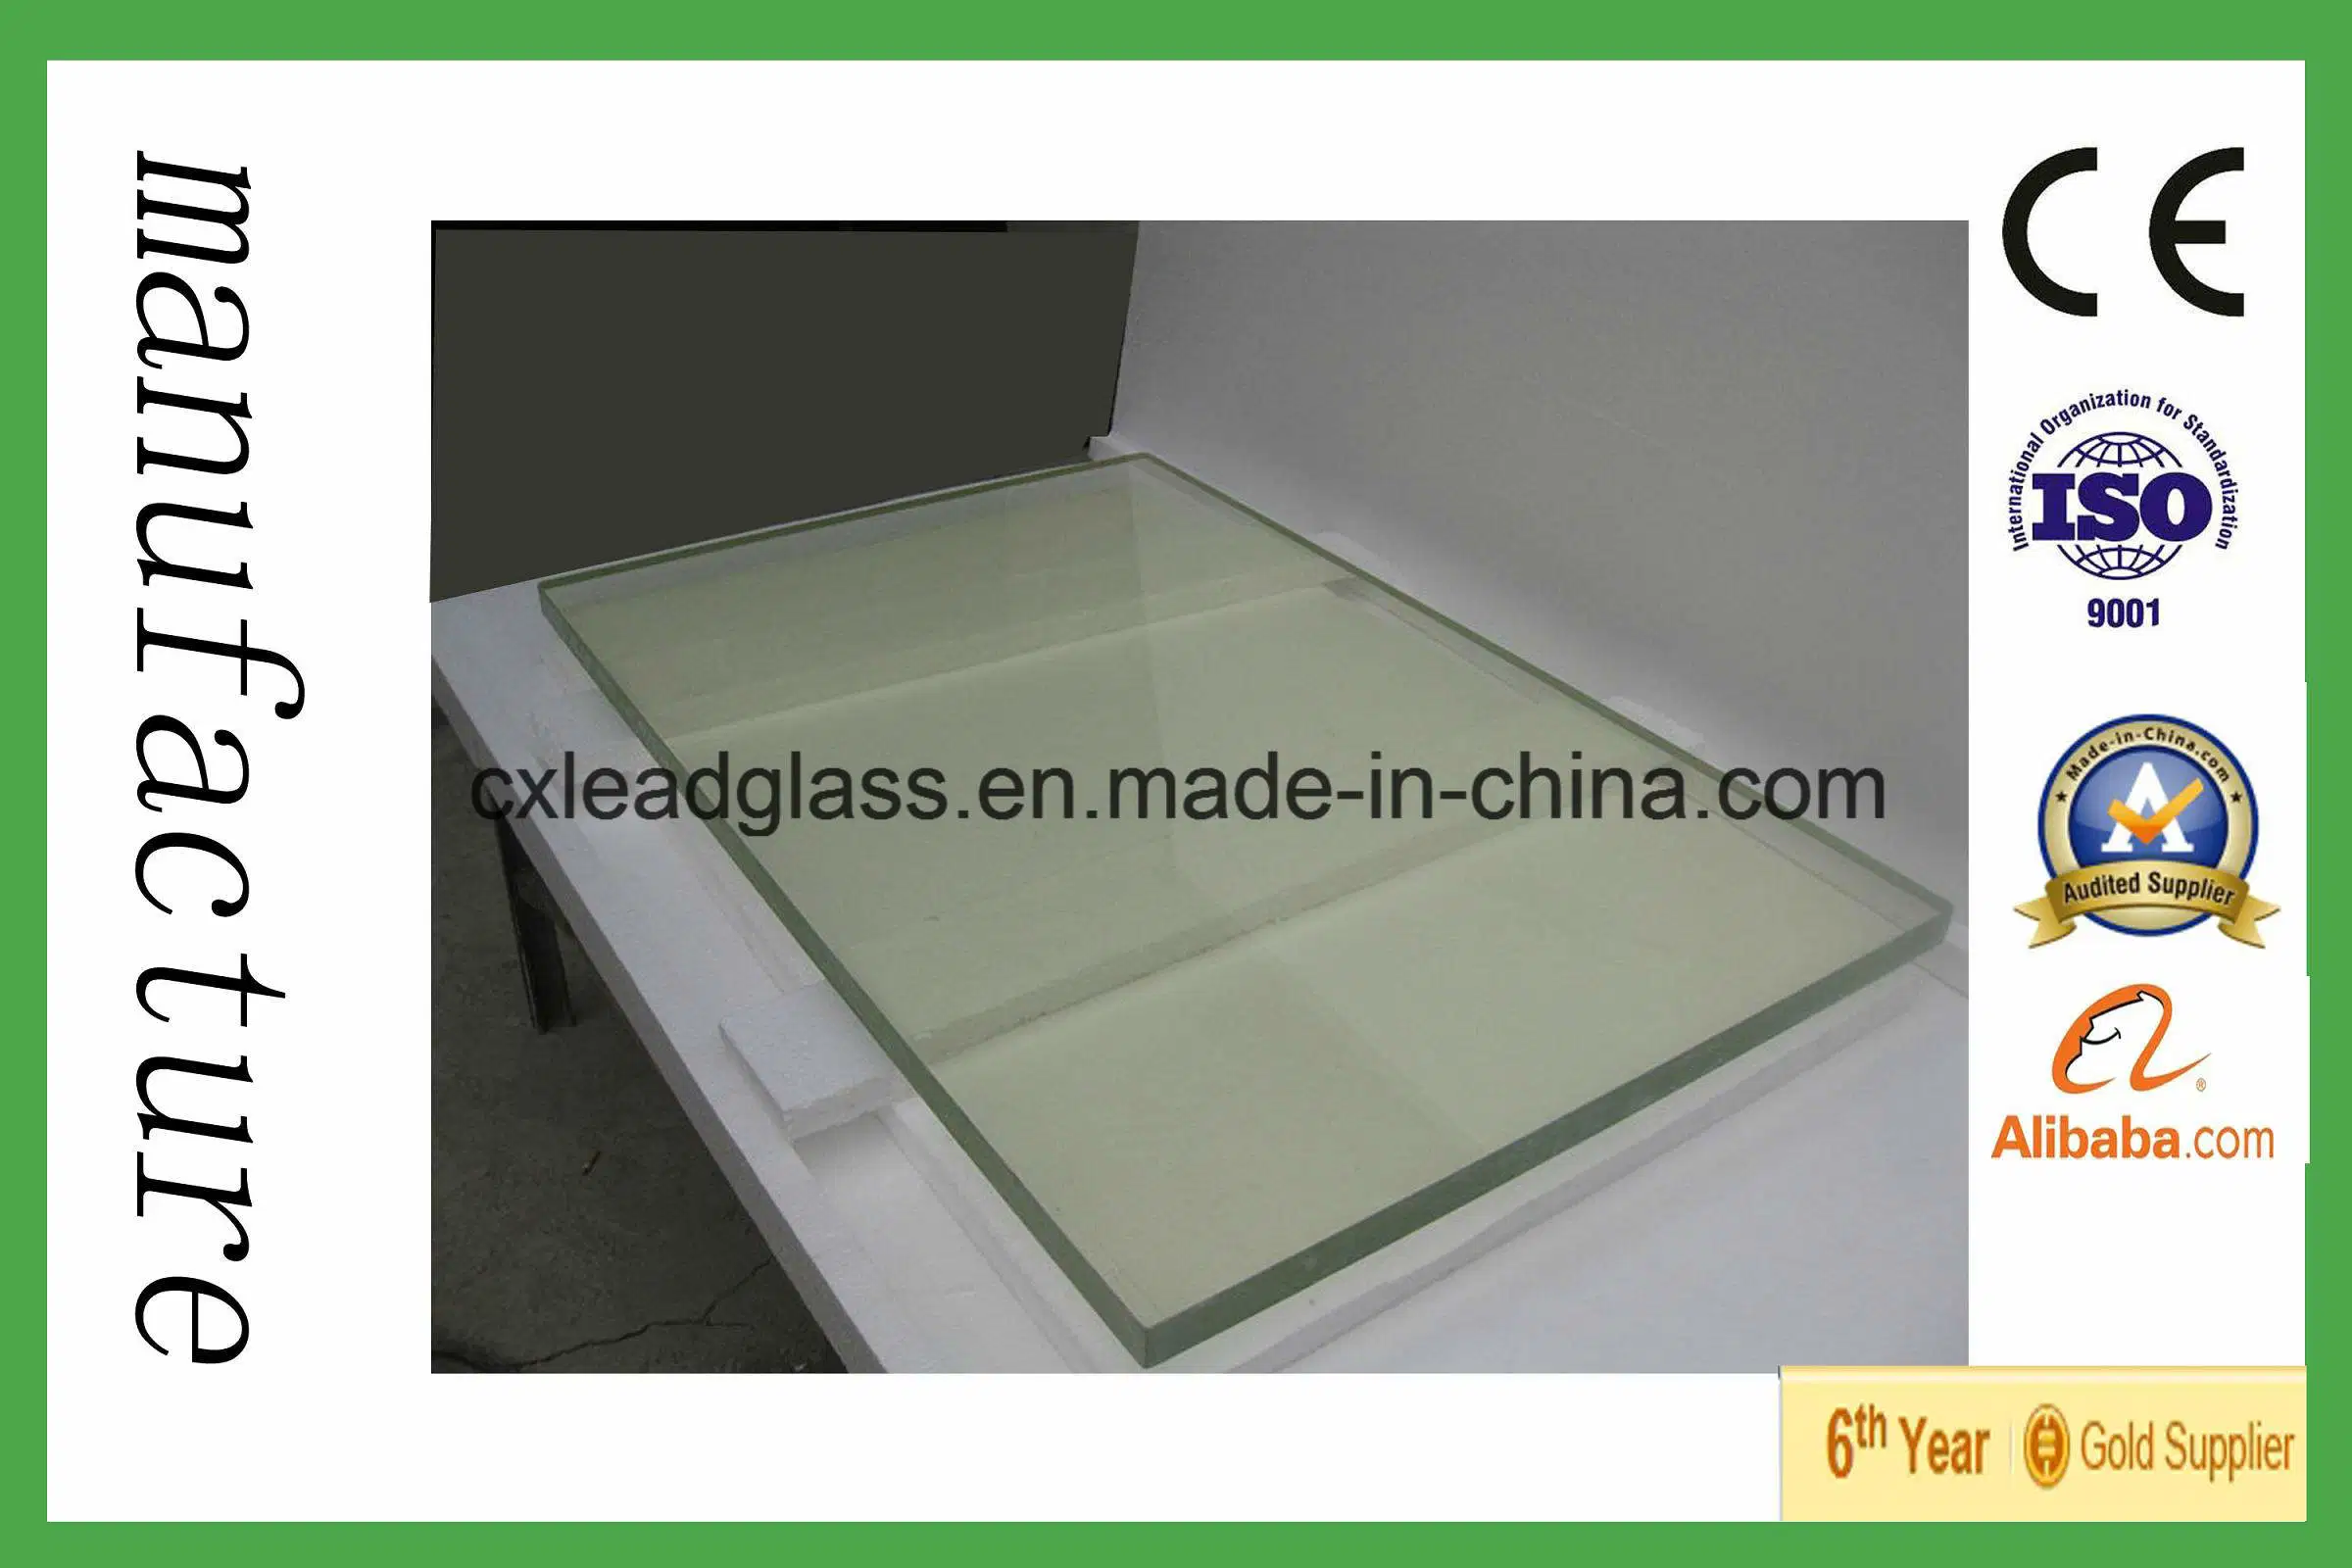 High Transparent 2mmpb /Radiation Shielding/ X Ray /X-ray /Protection Safety Lead Glass Windows Medical for Hospital CT Room